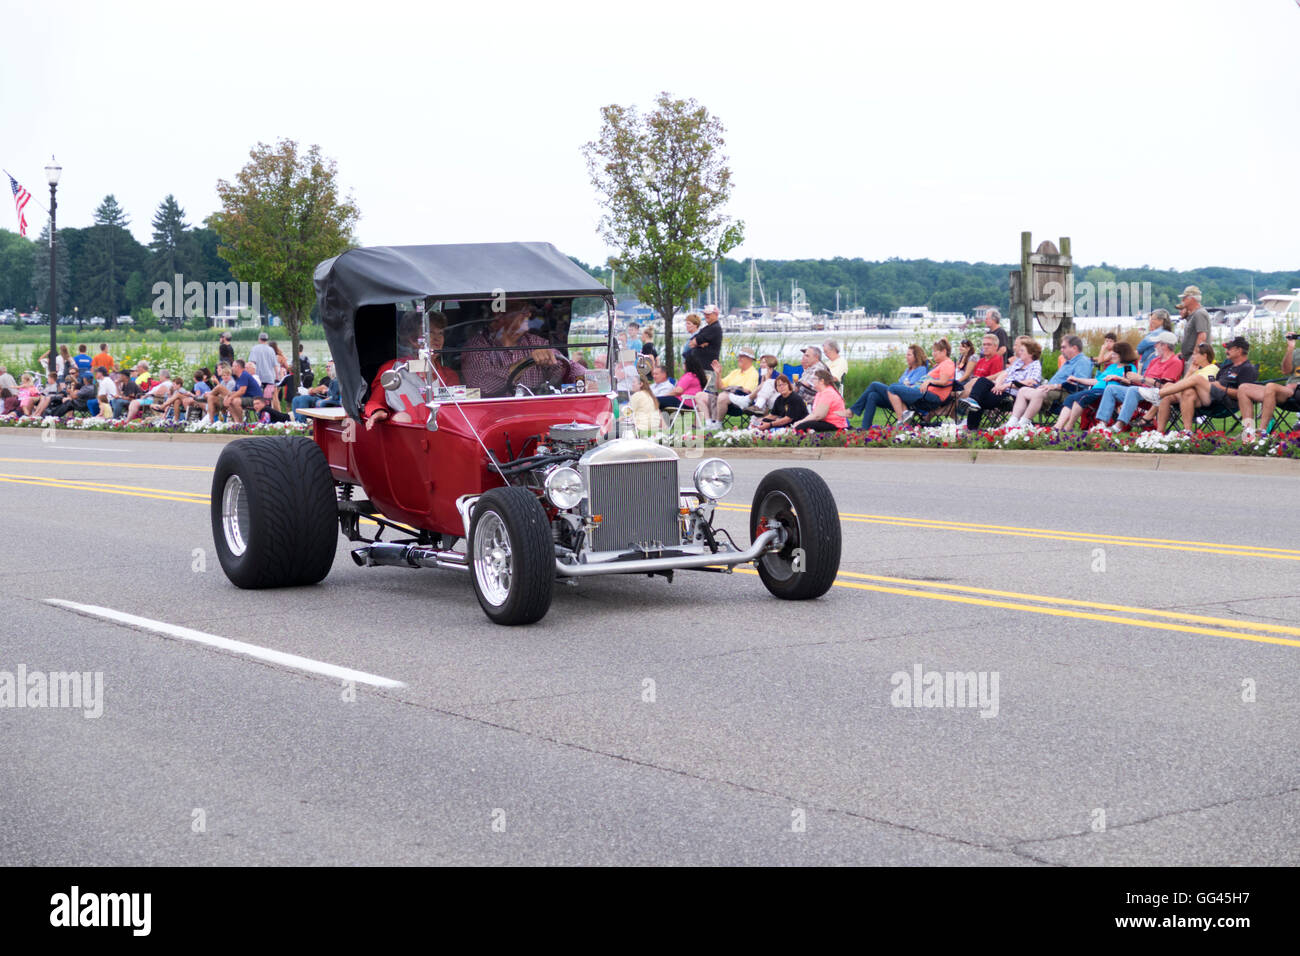 Hot Rod participating in the 2016 annual Cruz In parade in Montague, Michigan. Stock Photo